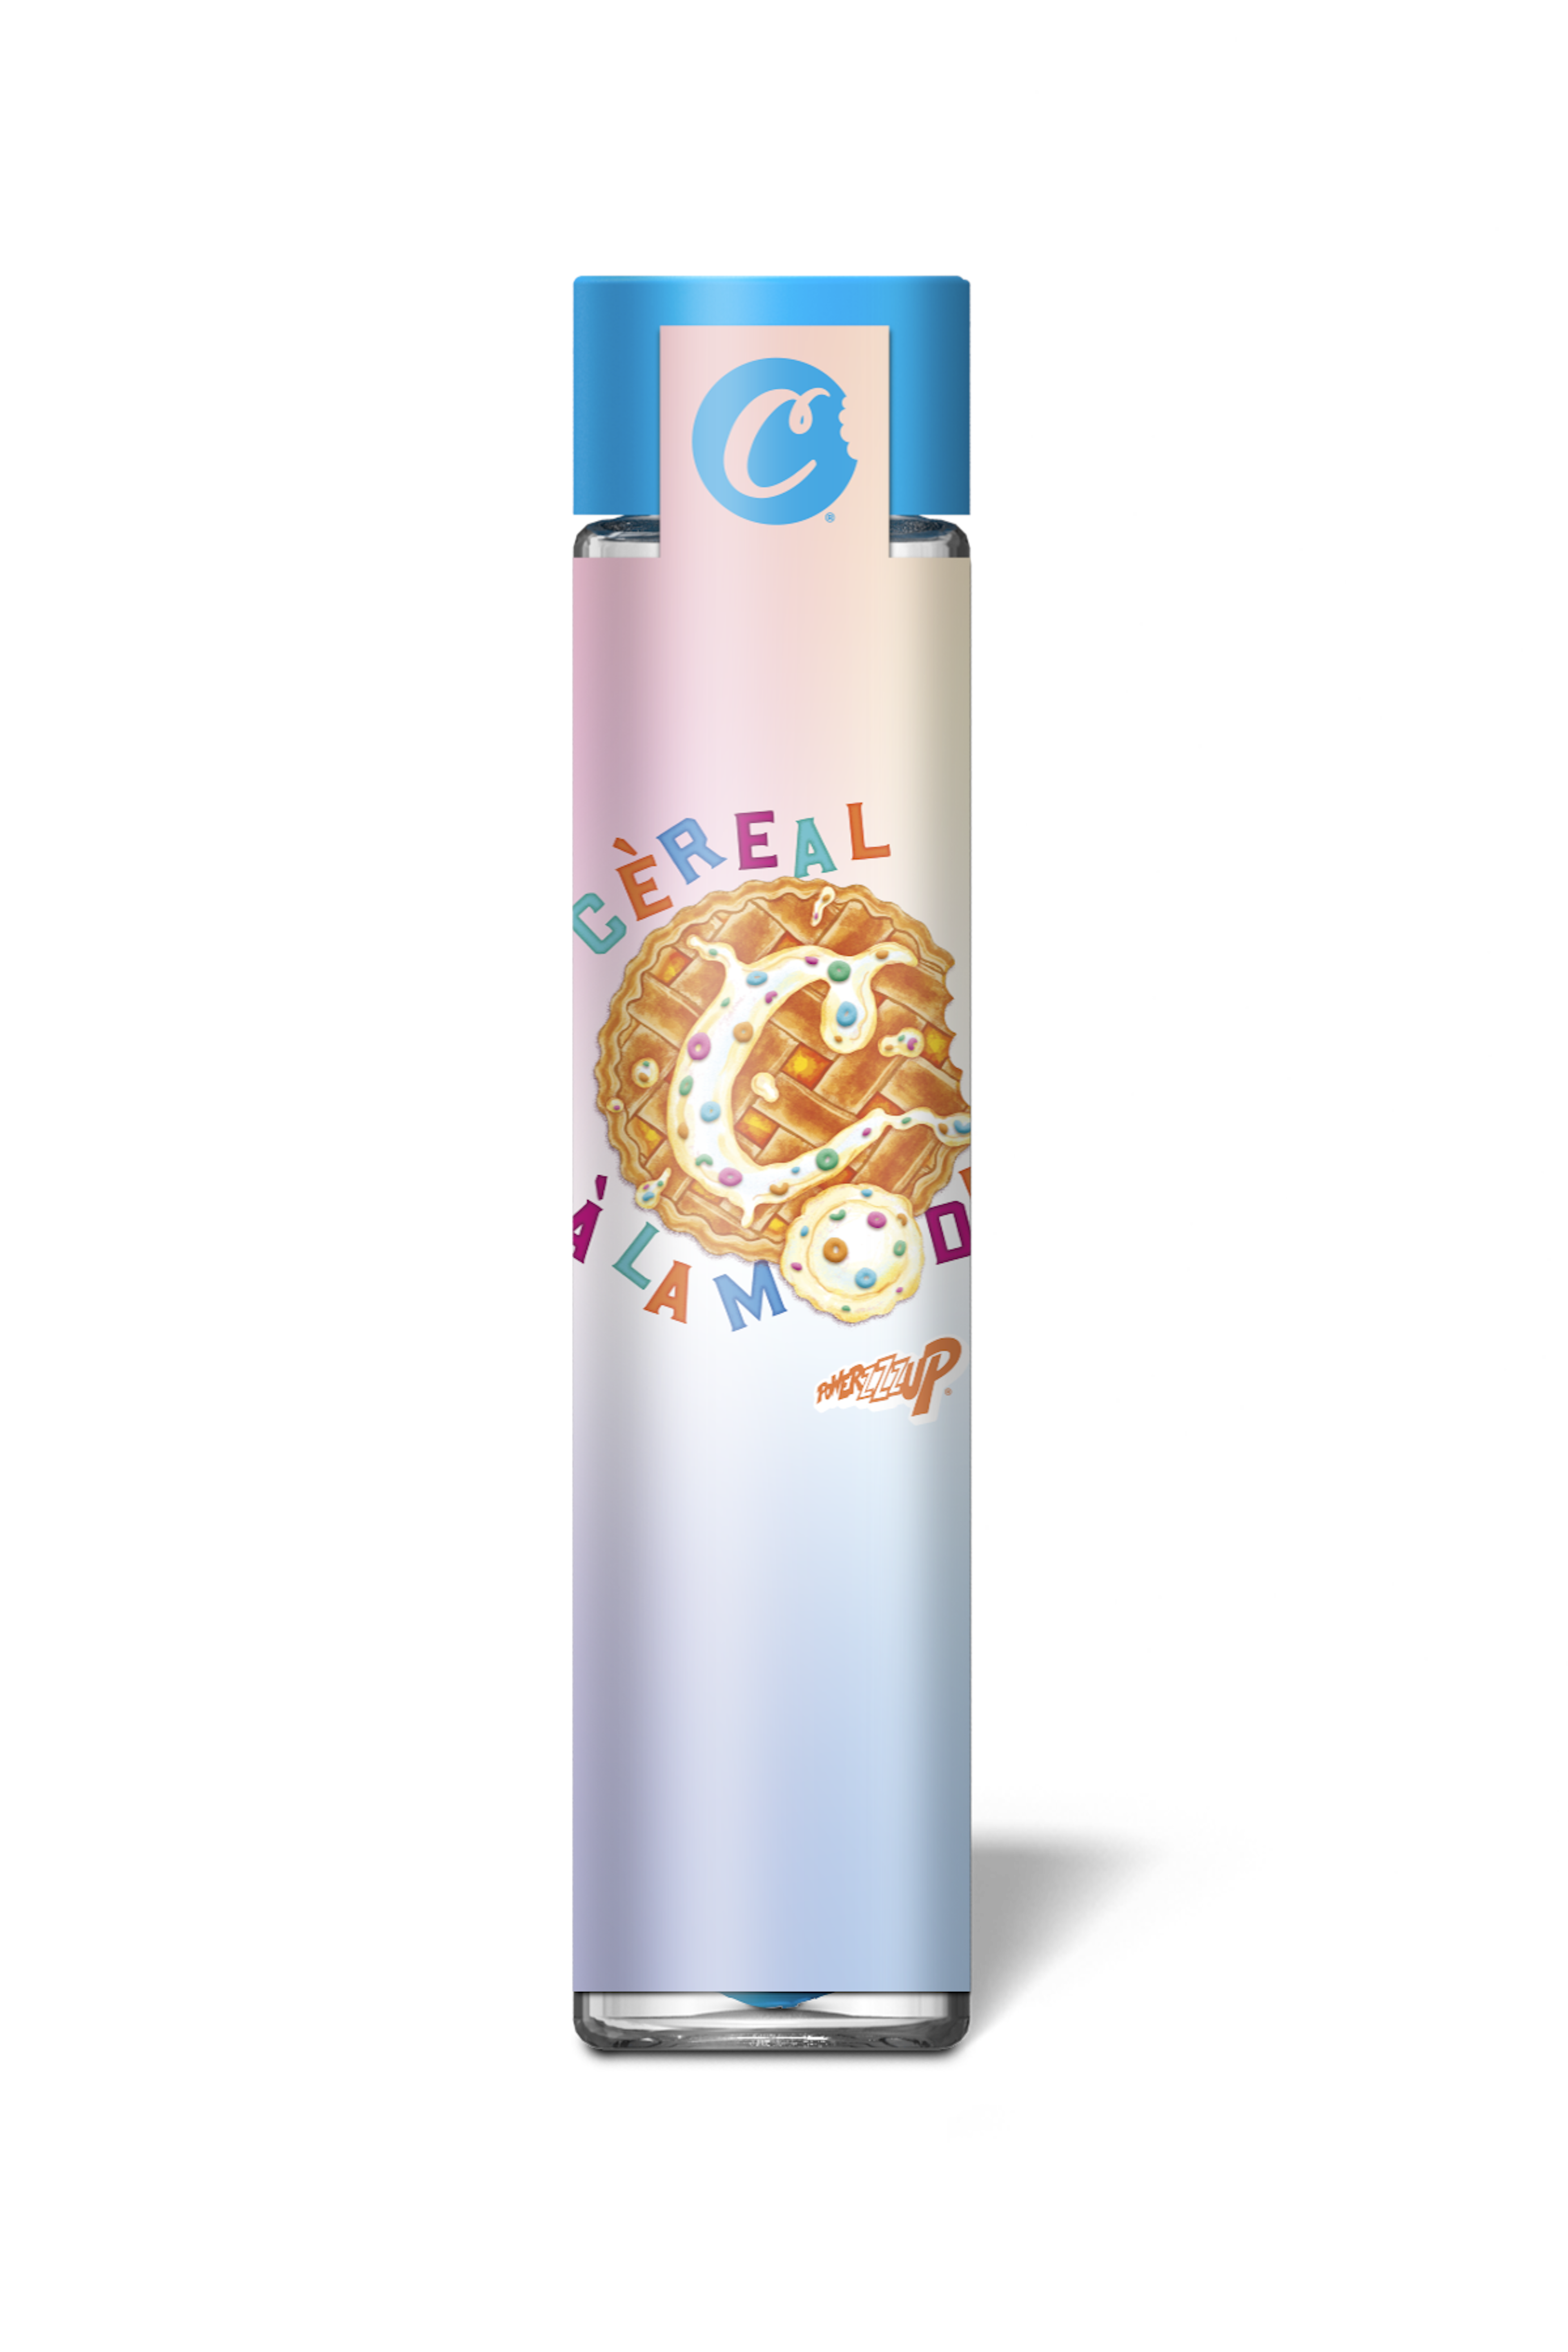 Cookies - Cèreal À La Mode - THC - Indoor - Non Infused - Joint - Preroll - Tube - 1g - CA